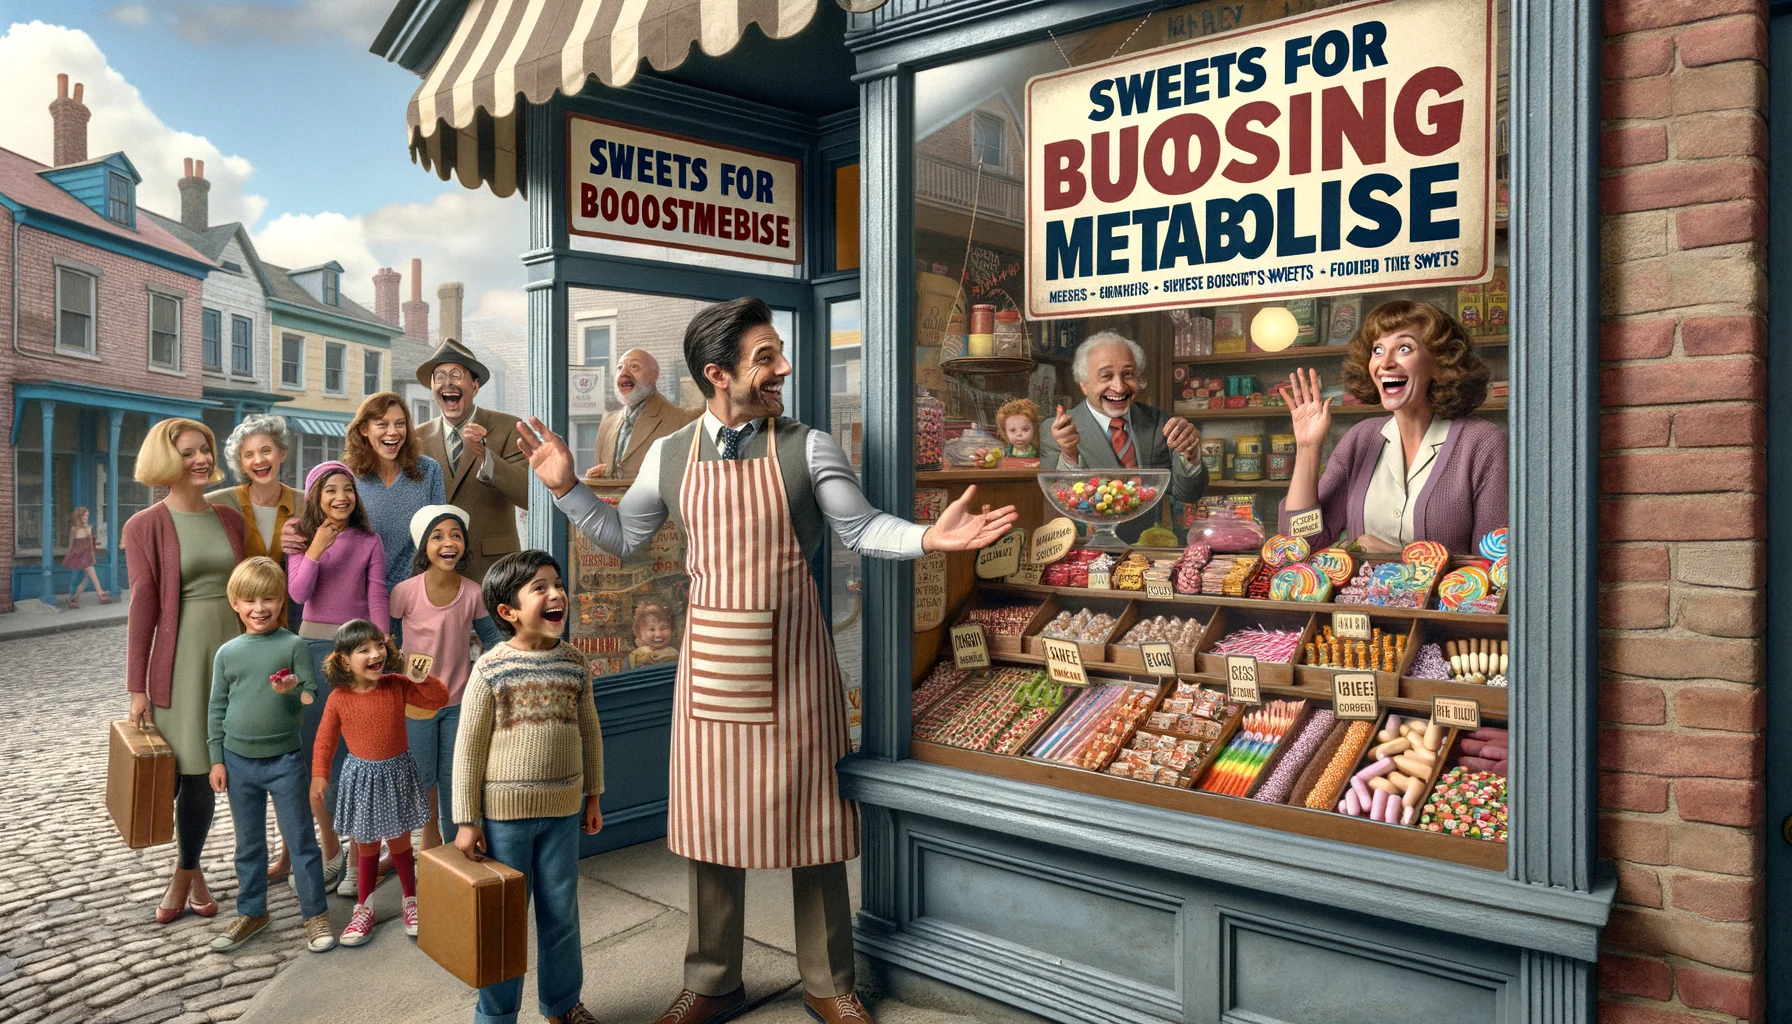 Imagine an amusing and realistic scenario of a quaint candy shop in a small town. The shop's display window holds a colorful variety of sweets and has a sign titled 'Sweets for Boosting Metabolism'. A pleasantly surprised customer, a middle-aged Hispanic woman in casual attire, is looking at the sweets with wide eyes and an open mouth. Beside her, a Caucasian male shopkeeper in an old-fashioned candy-striped apron is cheerfully gesturing towards the sweets. Across the shop, a group of children, diverse in race, are beaming with joy and anticipation, their hands are full of metabolism-boosting sweets.